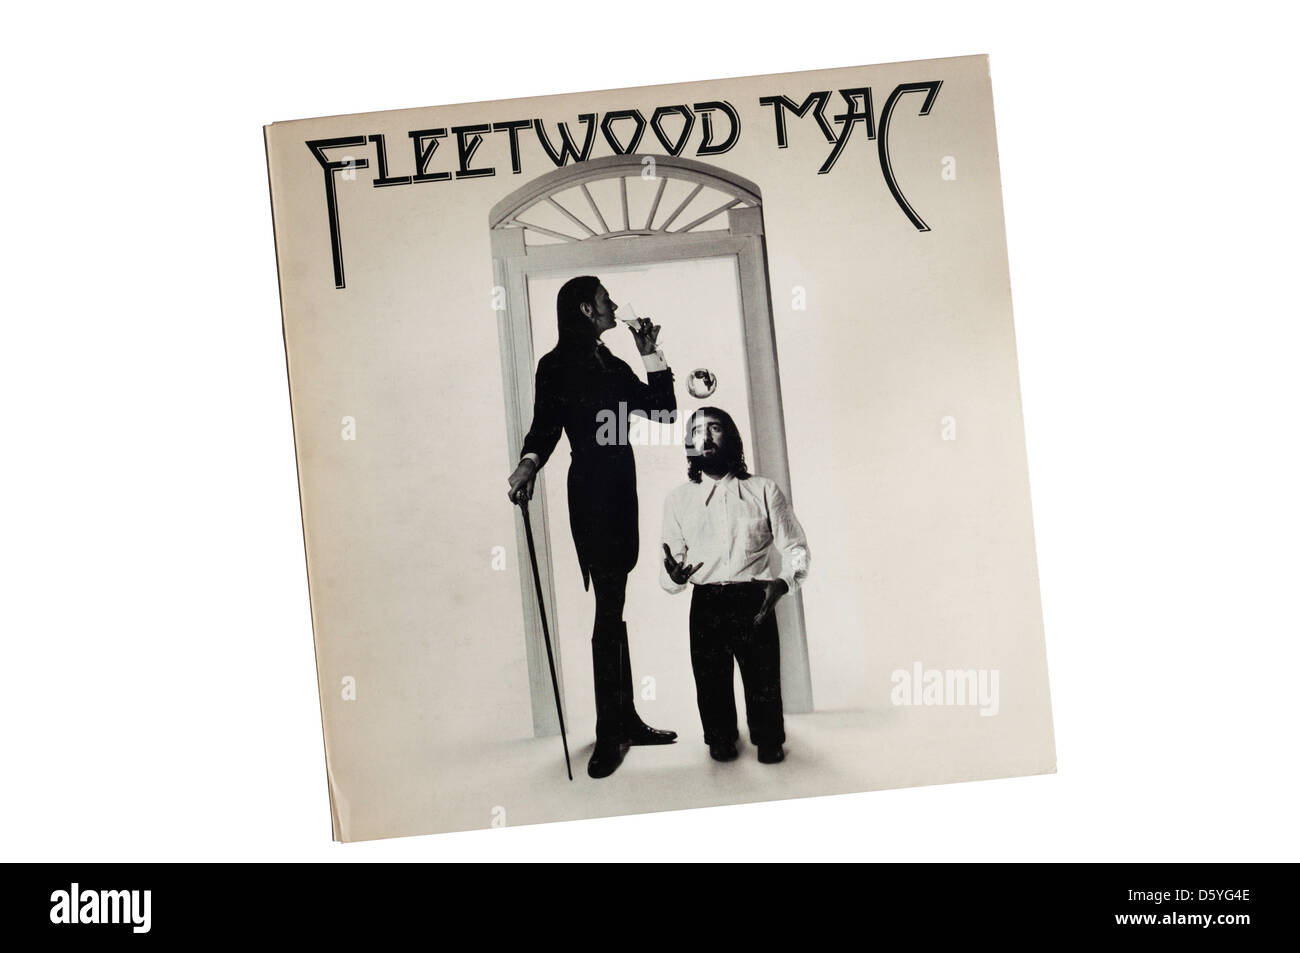 Fleetwood Mac was the 10th album by the British-American band Fleetwood Mac, released in 1975, and their second eponymous album. Stock Photo